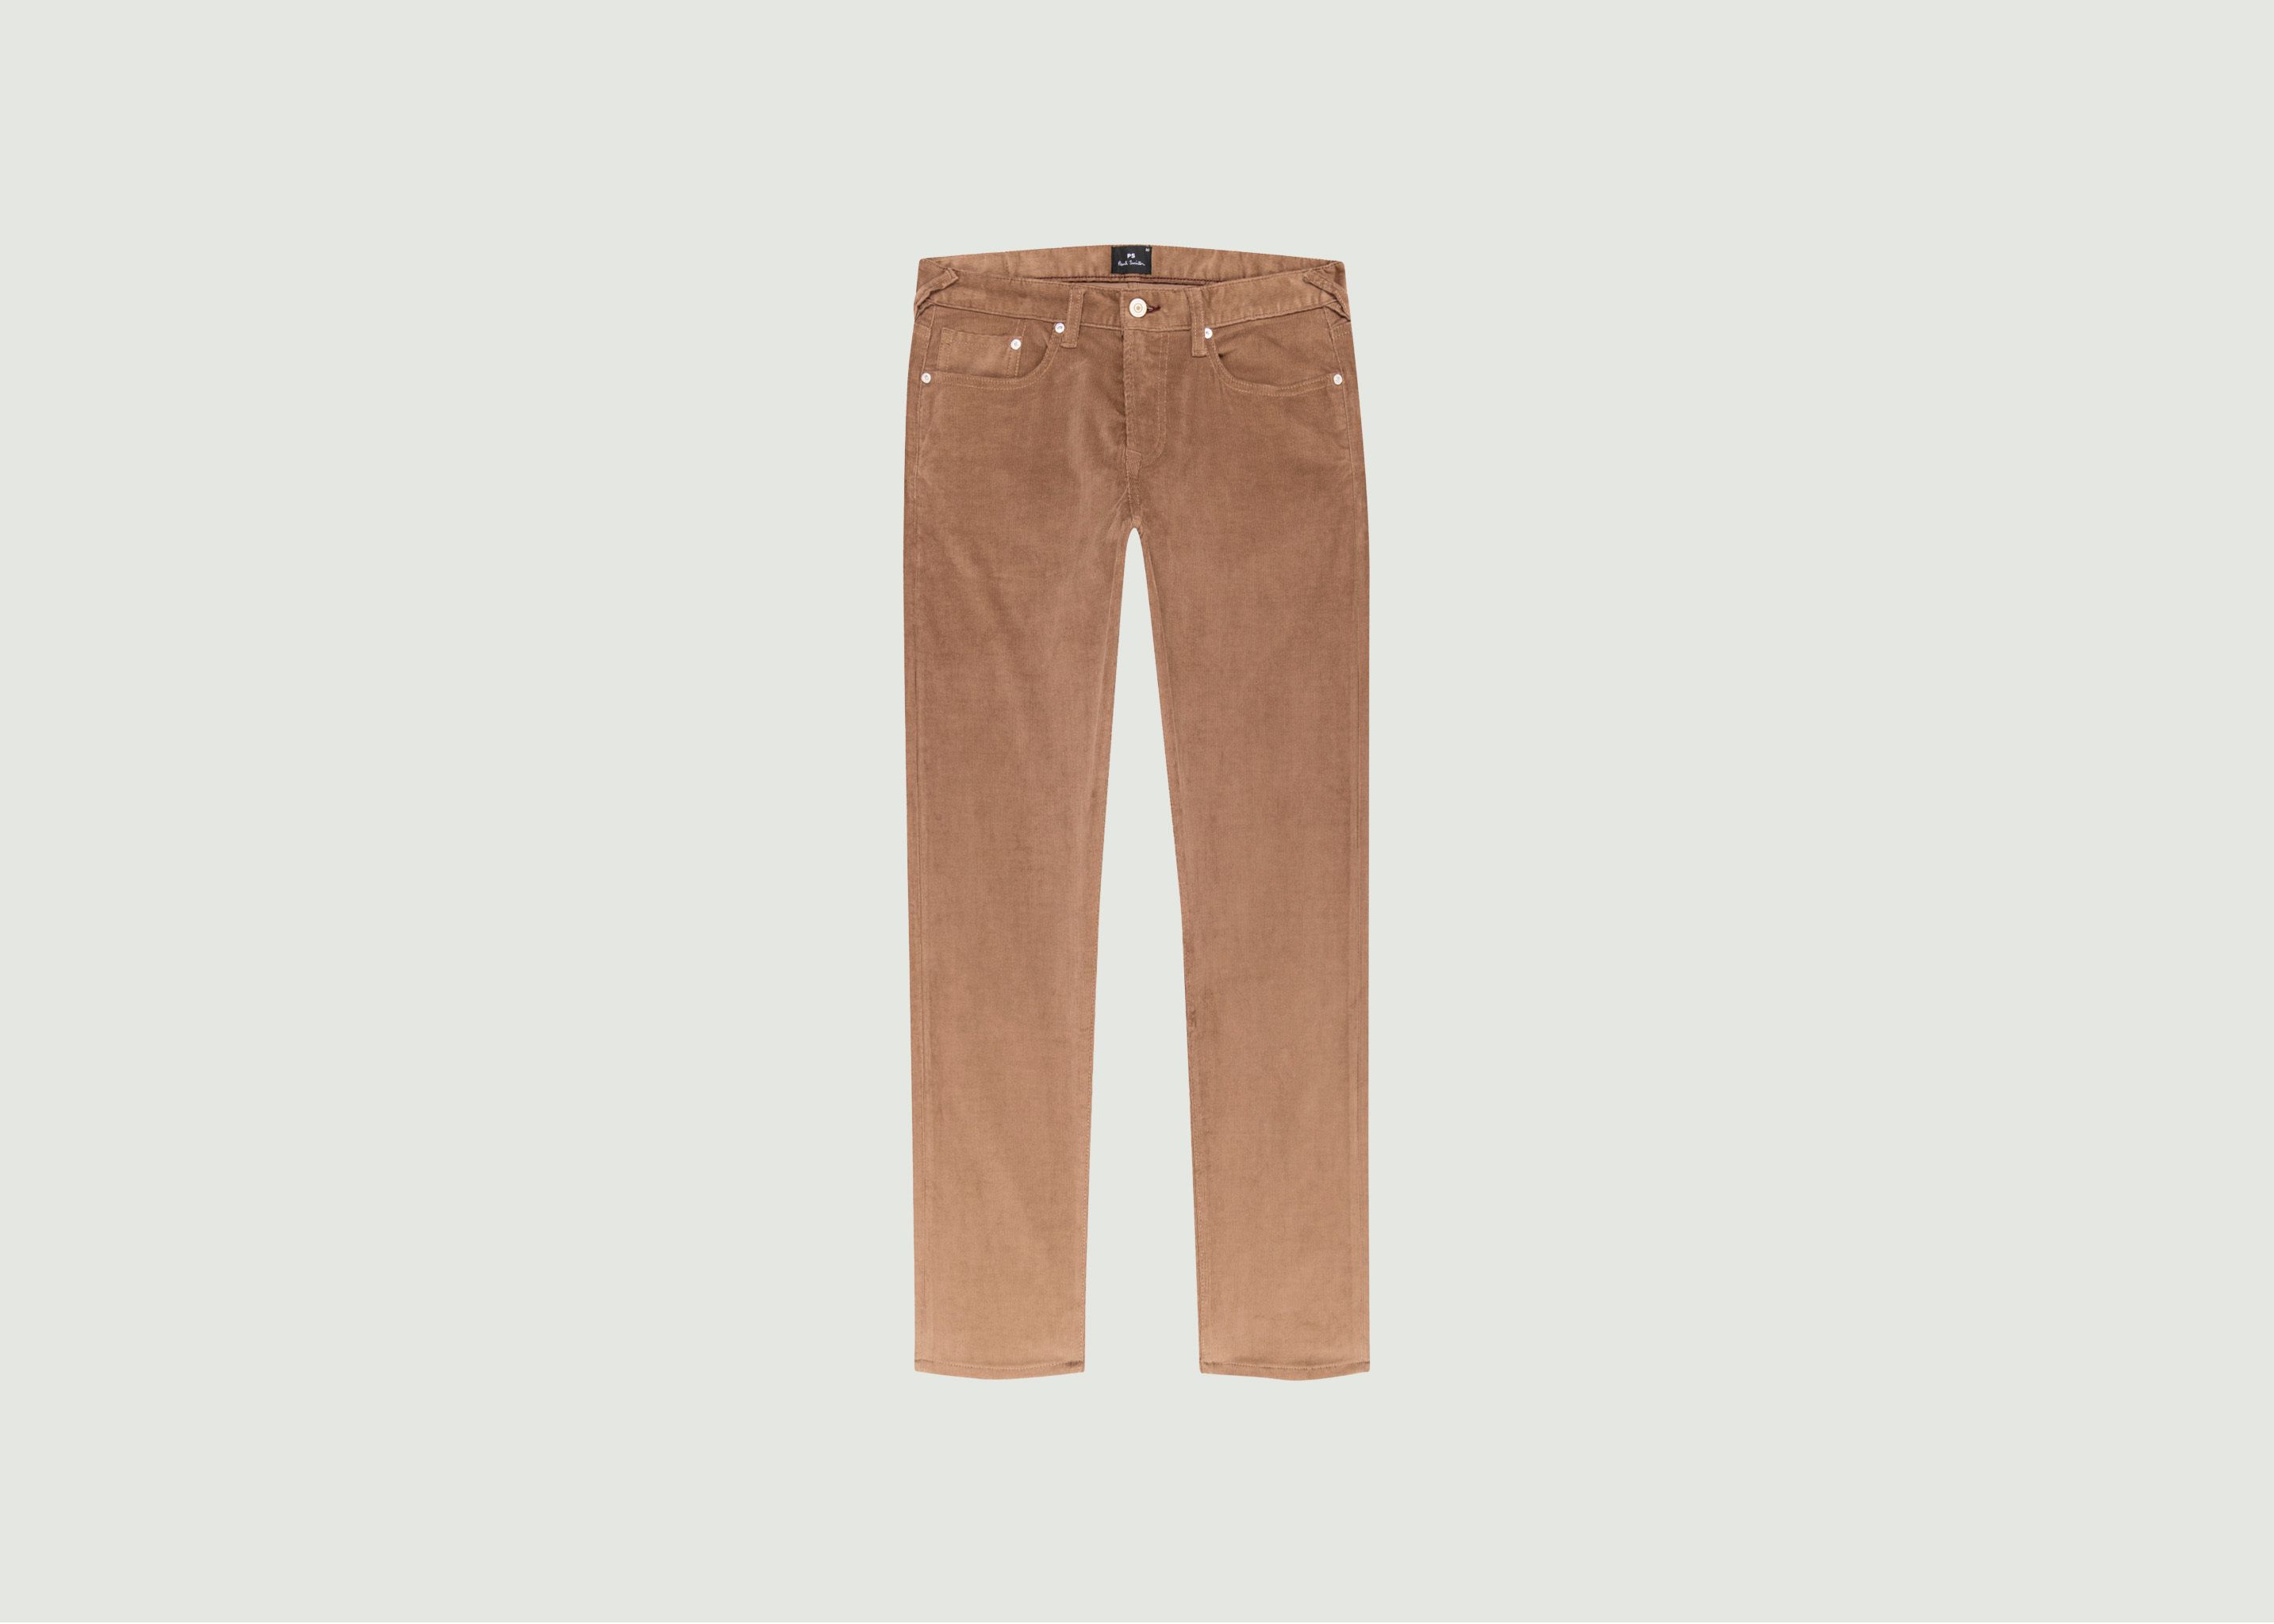 Slim-fit chino pants - PS by PAUL SMITH